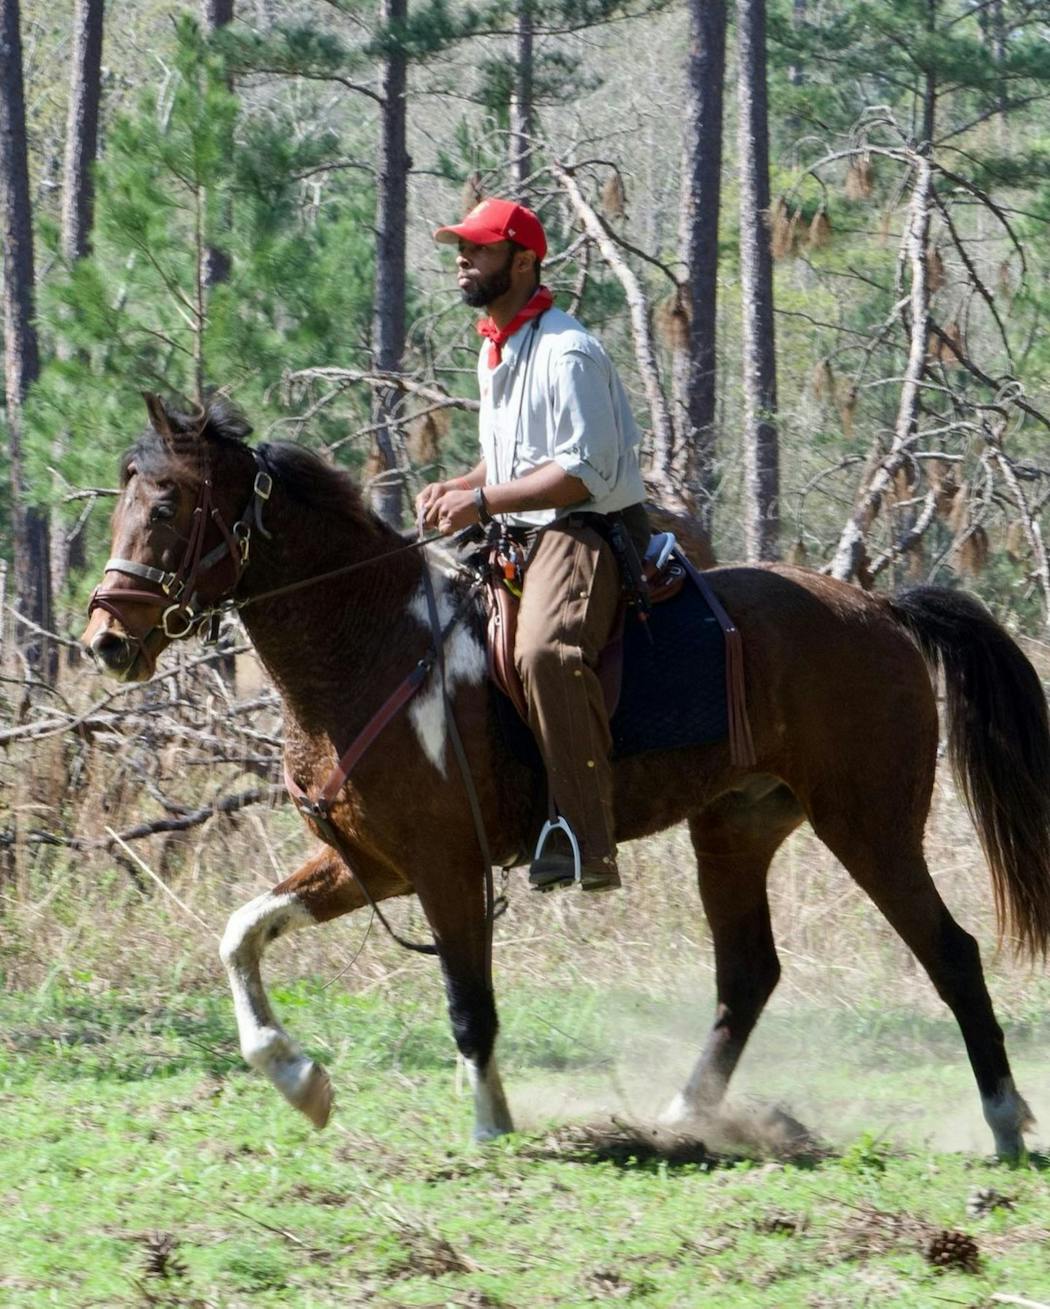 Some of Durrell Smith’s first experiences outdoors in his native Georgia were atop a horse.